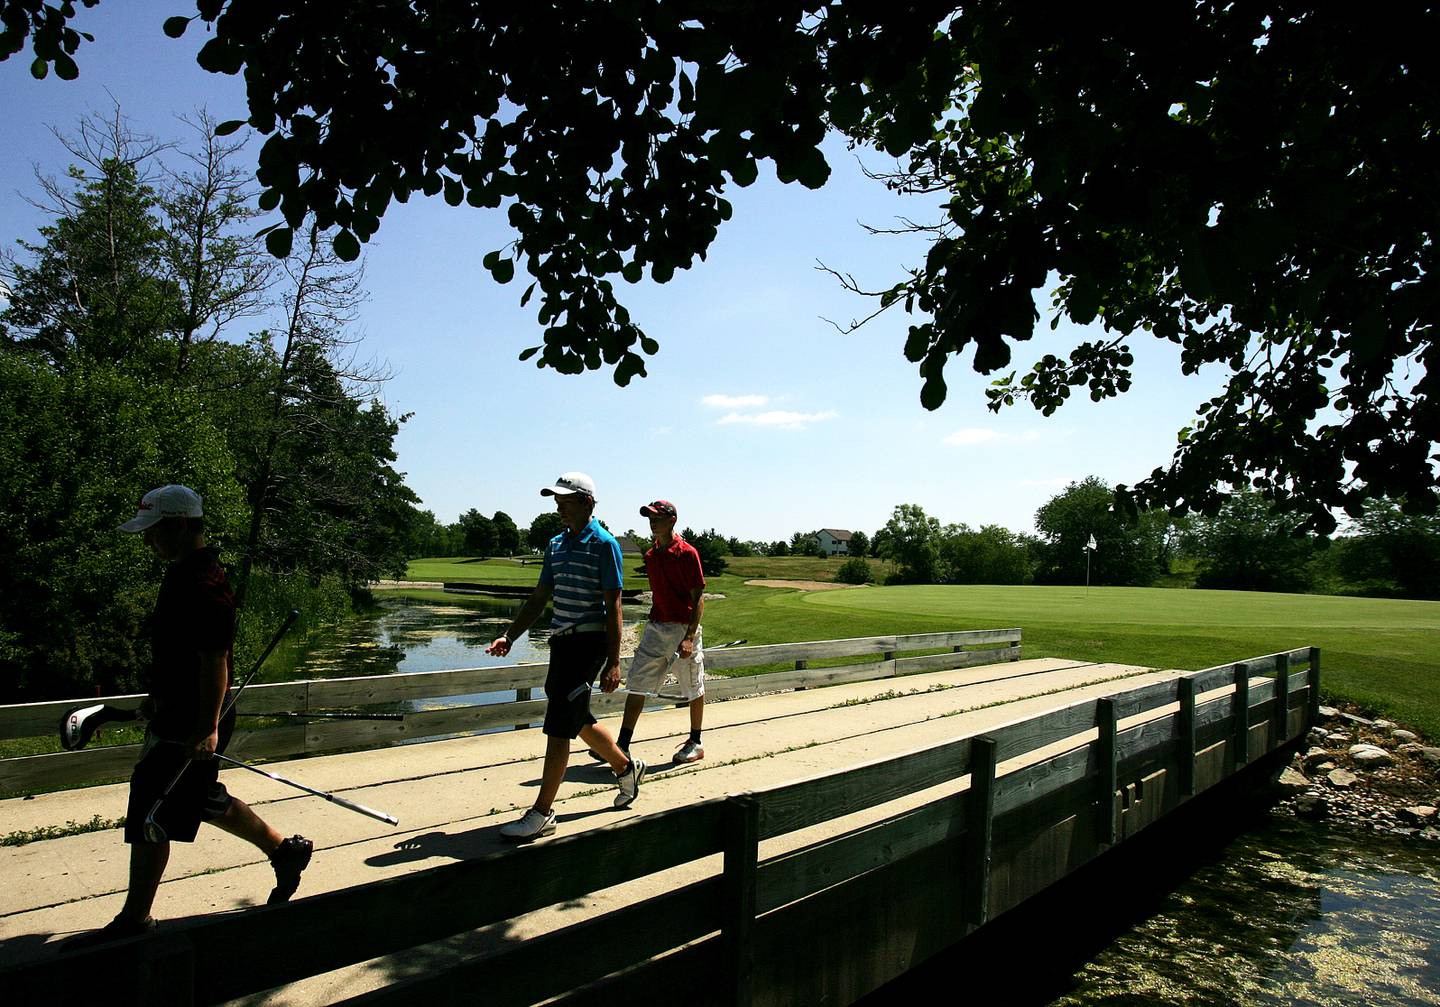 Jake Bowser (left), Connor Sullivan (center) and Brad Spoeth walk to hole 16 during the McHenry County Junior Golf Association's Redtail Open Tournament Wednesday, June 19, 2013 at the Redtail Golf Course in Lakewood.